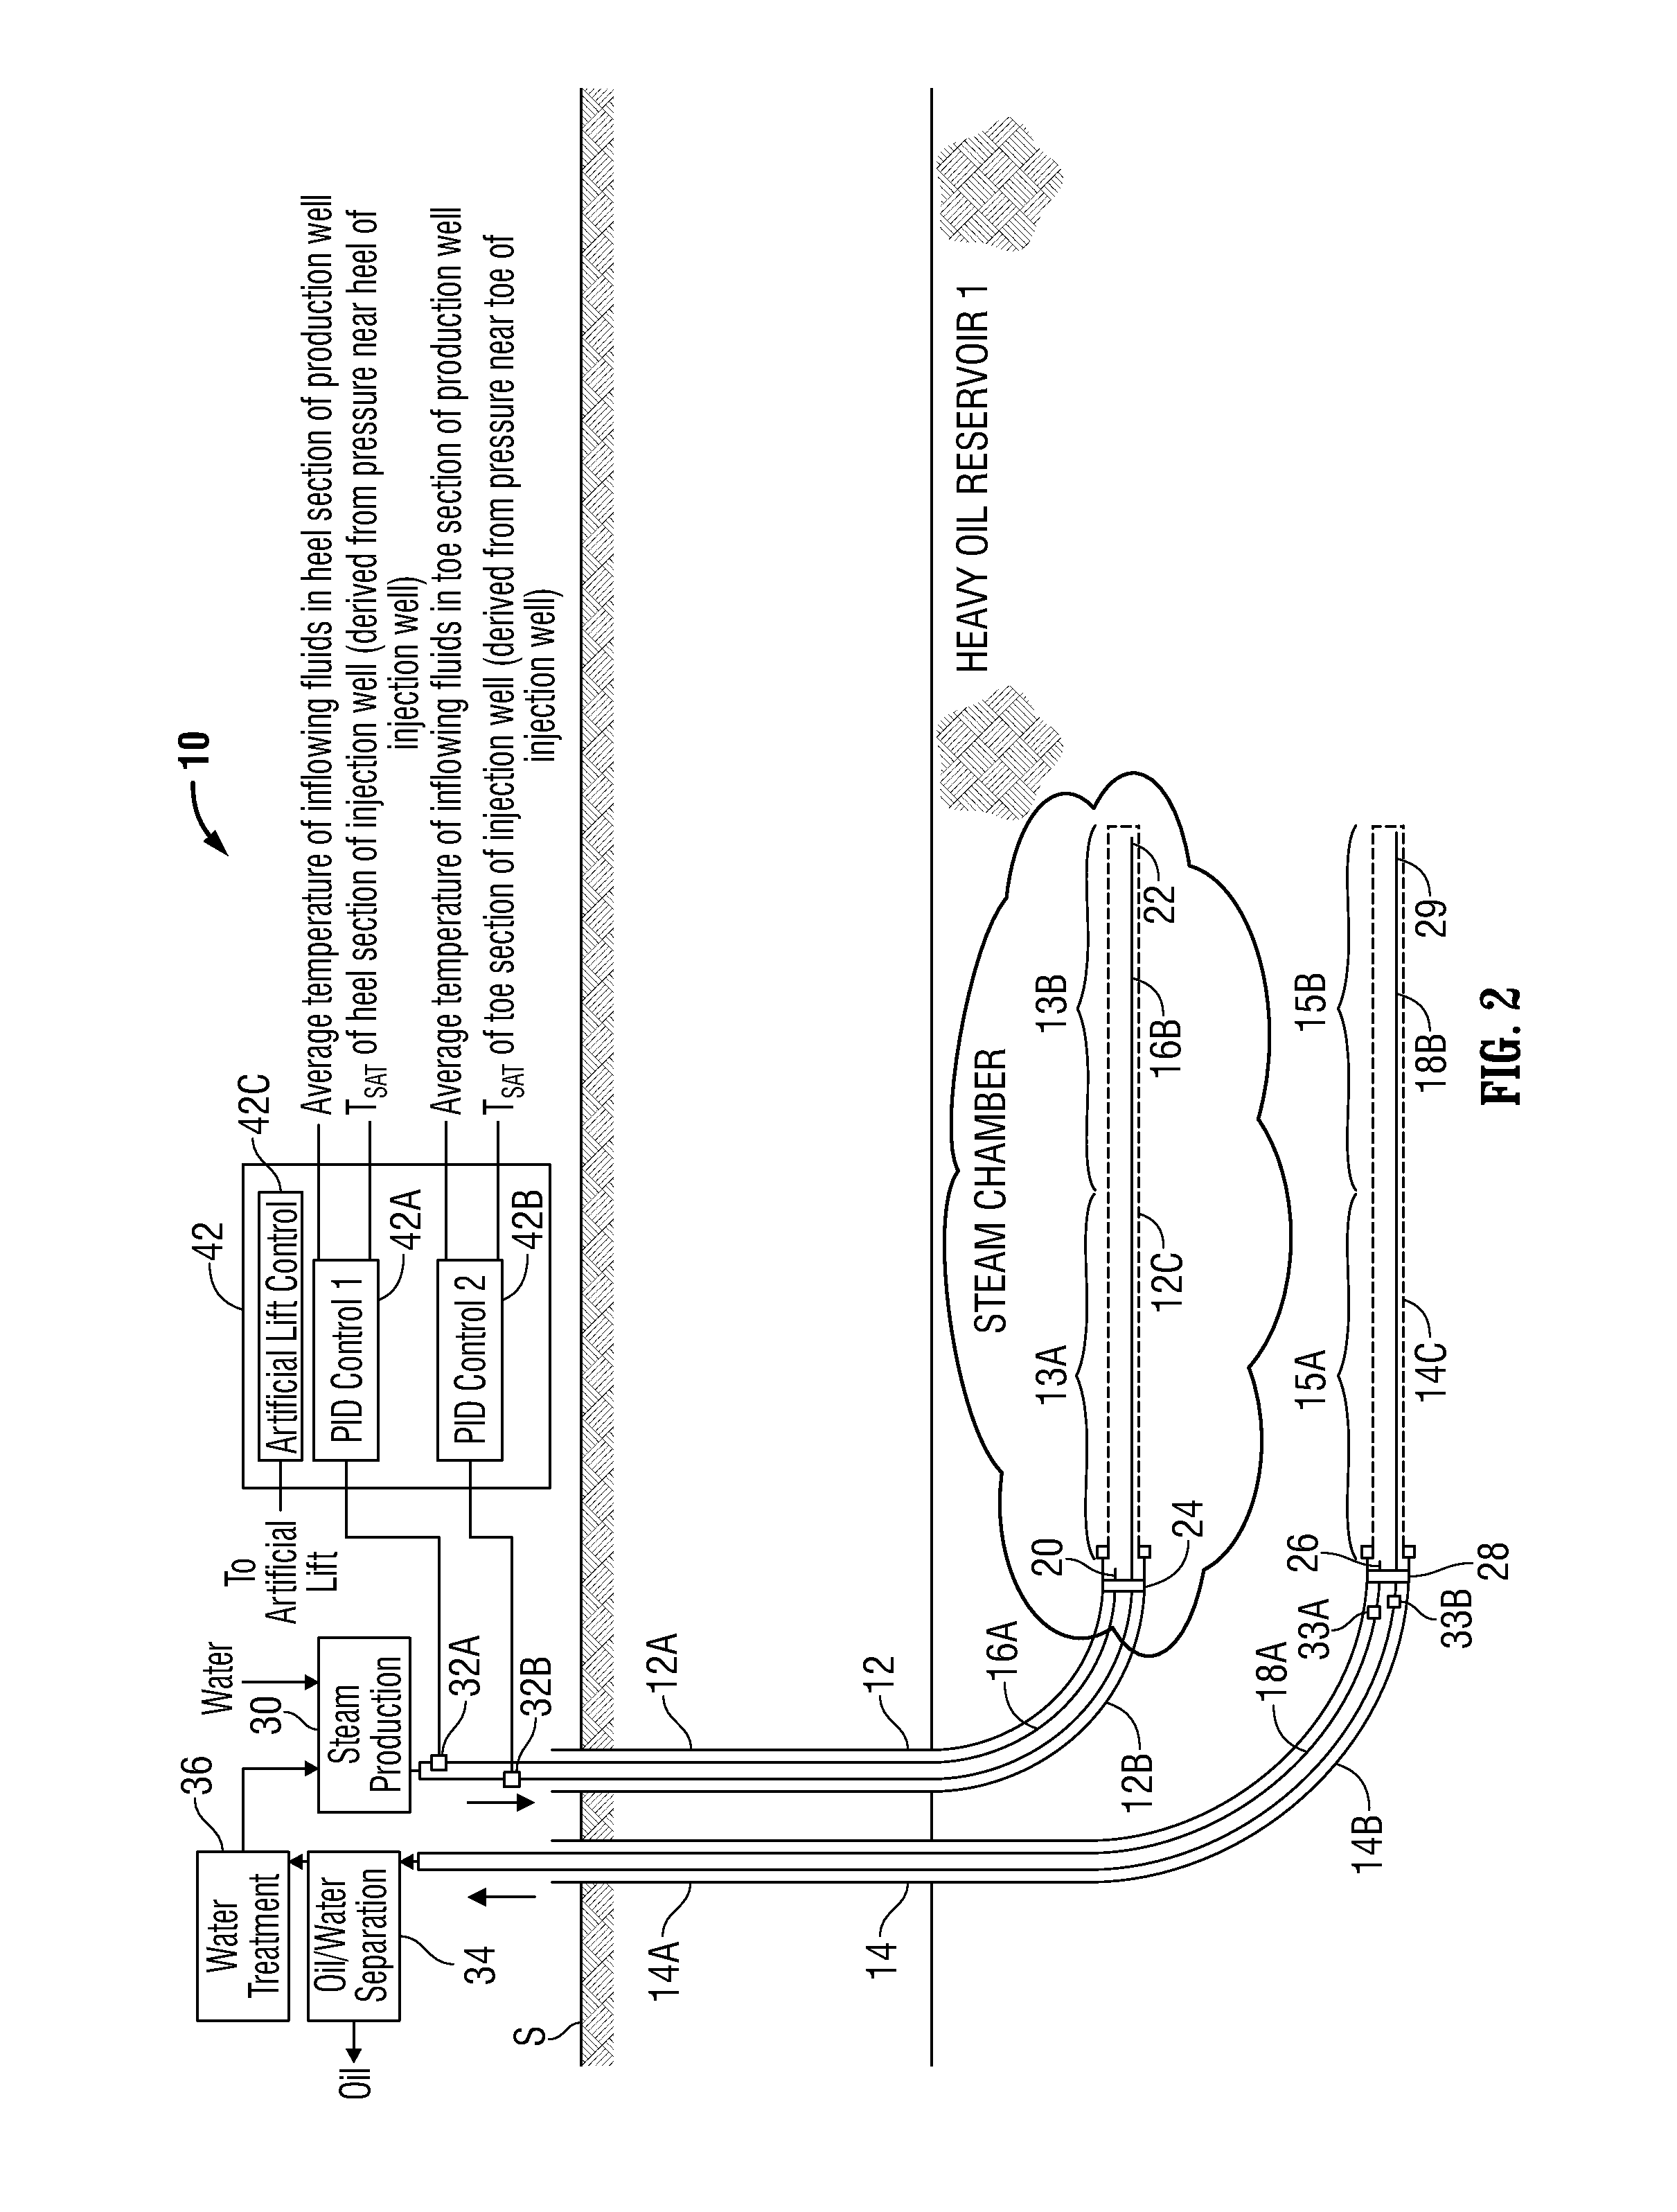 Hydrocarbon recovery employing an injection well and a production well having multiple tubing strings with active feedback control